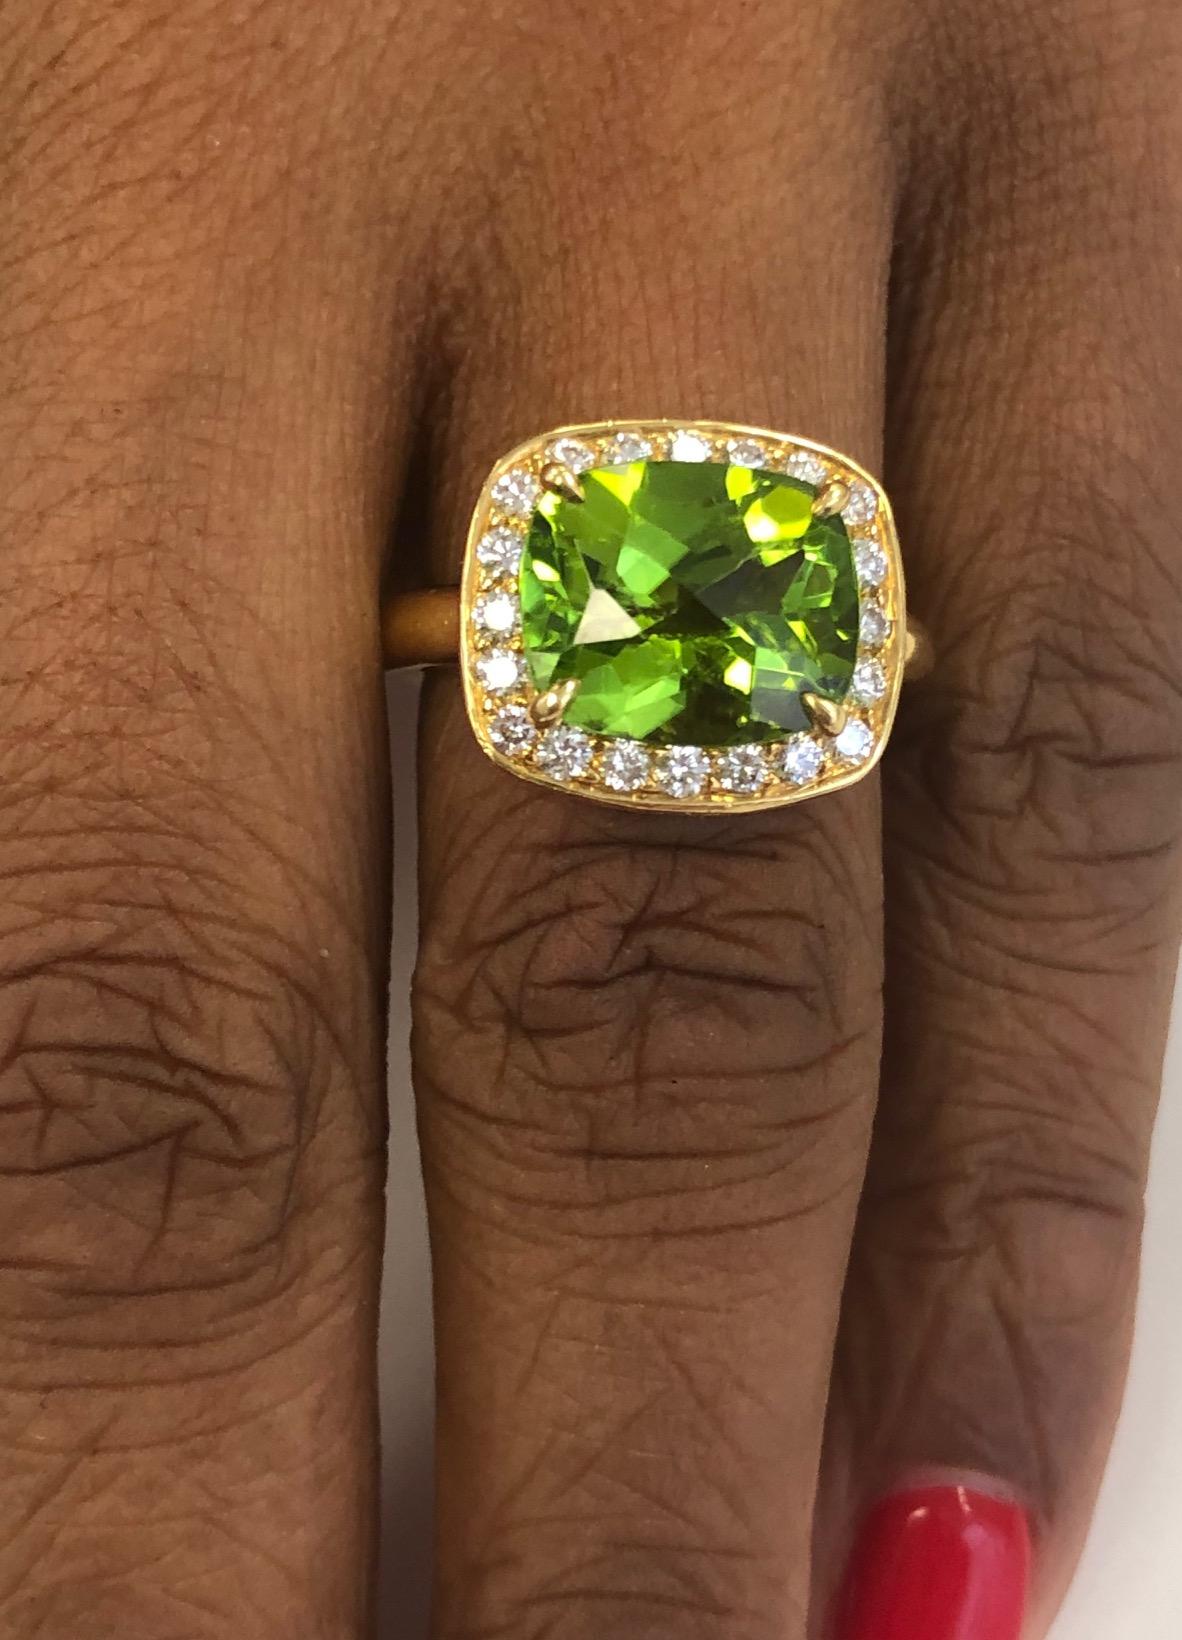 This beautiful Ring is perfect for everyday use,The ring is constructed for a perfect fit and comfort.
The ring is made in 20 kt Yellow Gold, set with 20 diamonds 0.48 carats and a cushion Peridot 5.50 carats.
The ring finger size is 6-3/8 ( EU